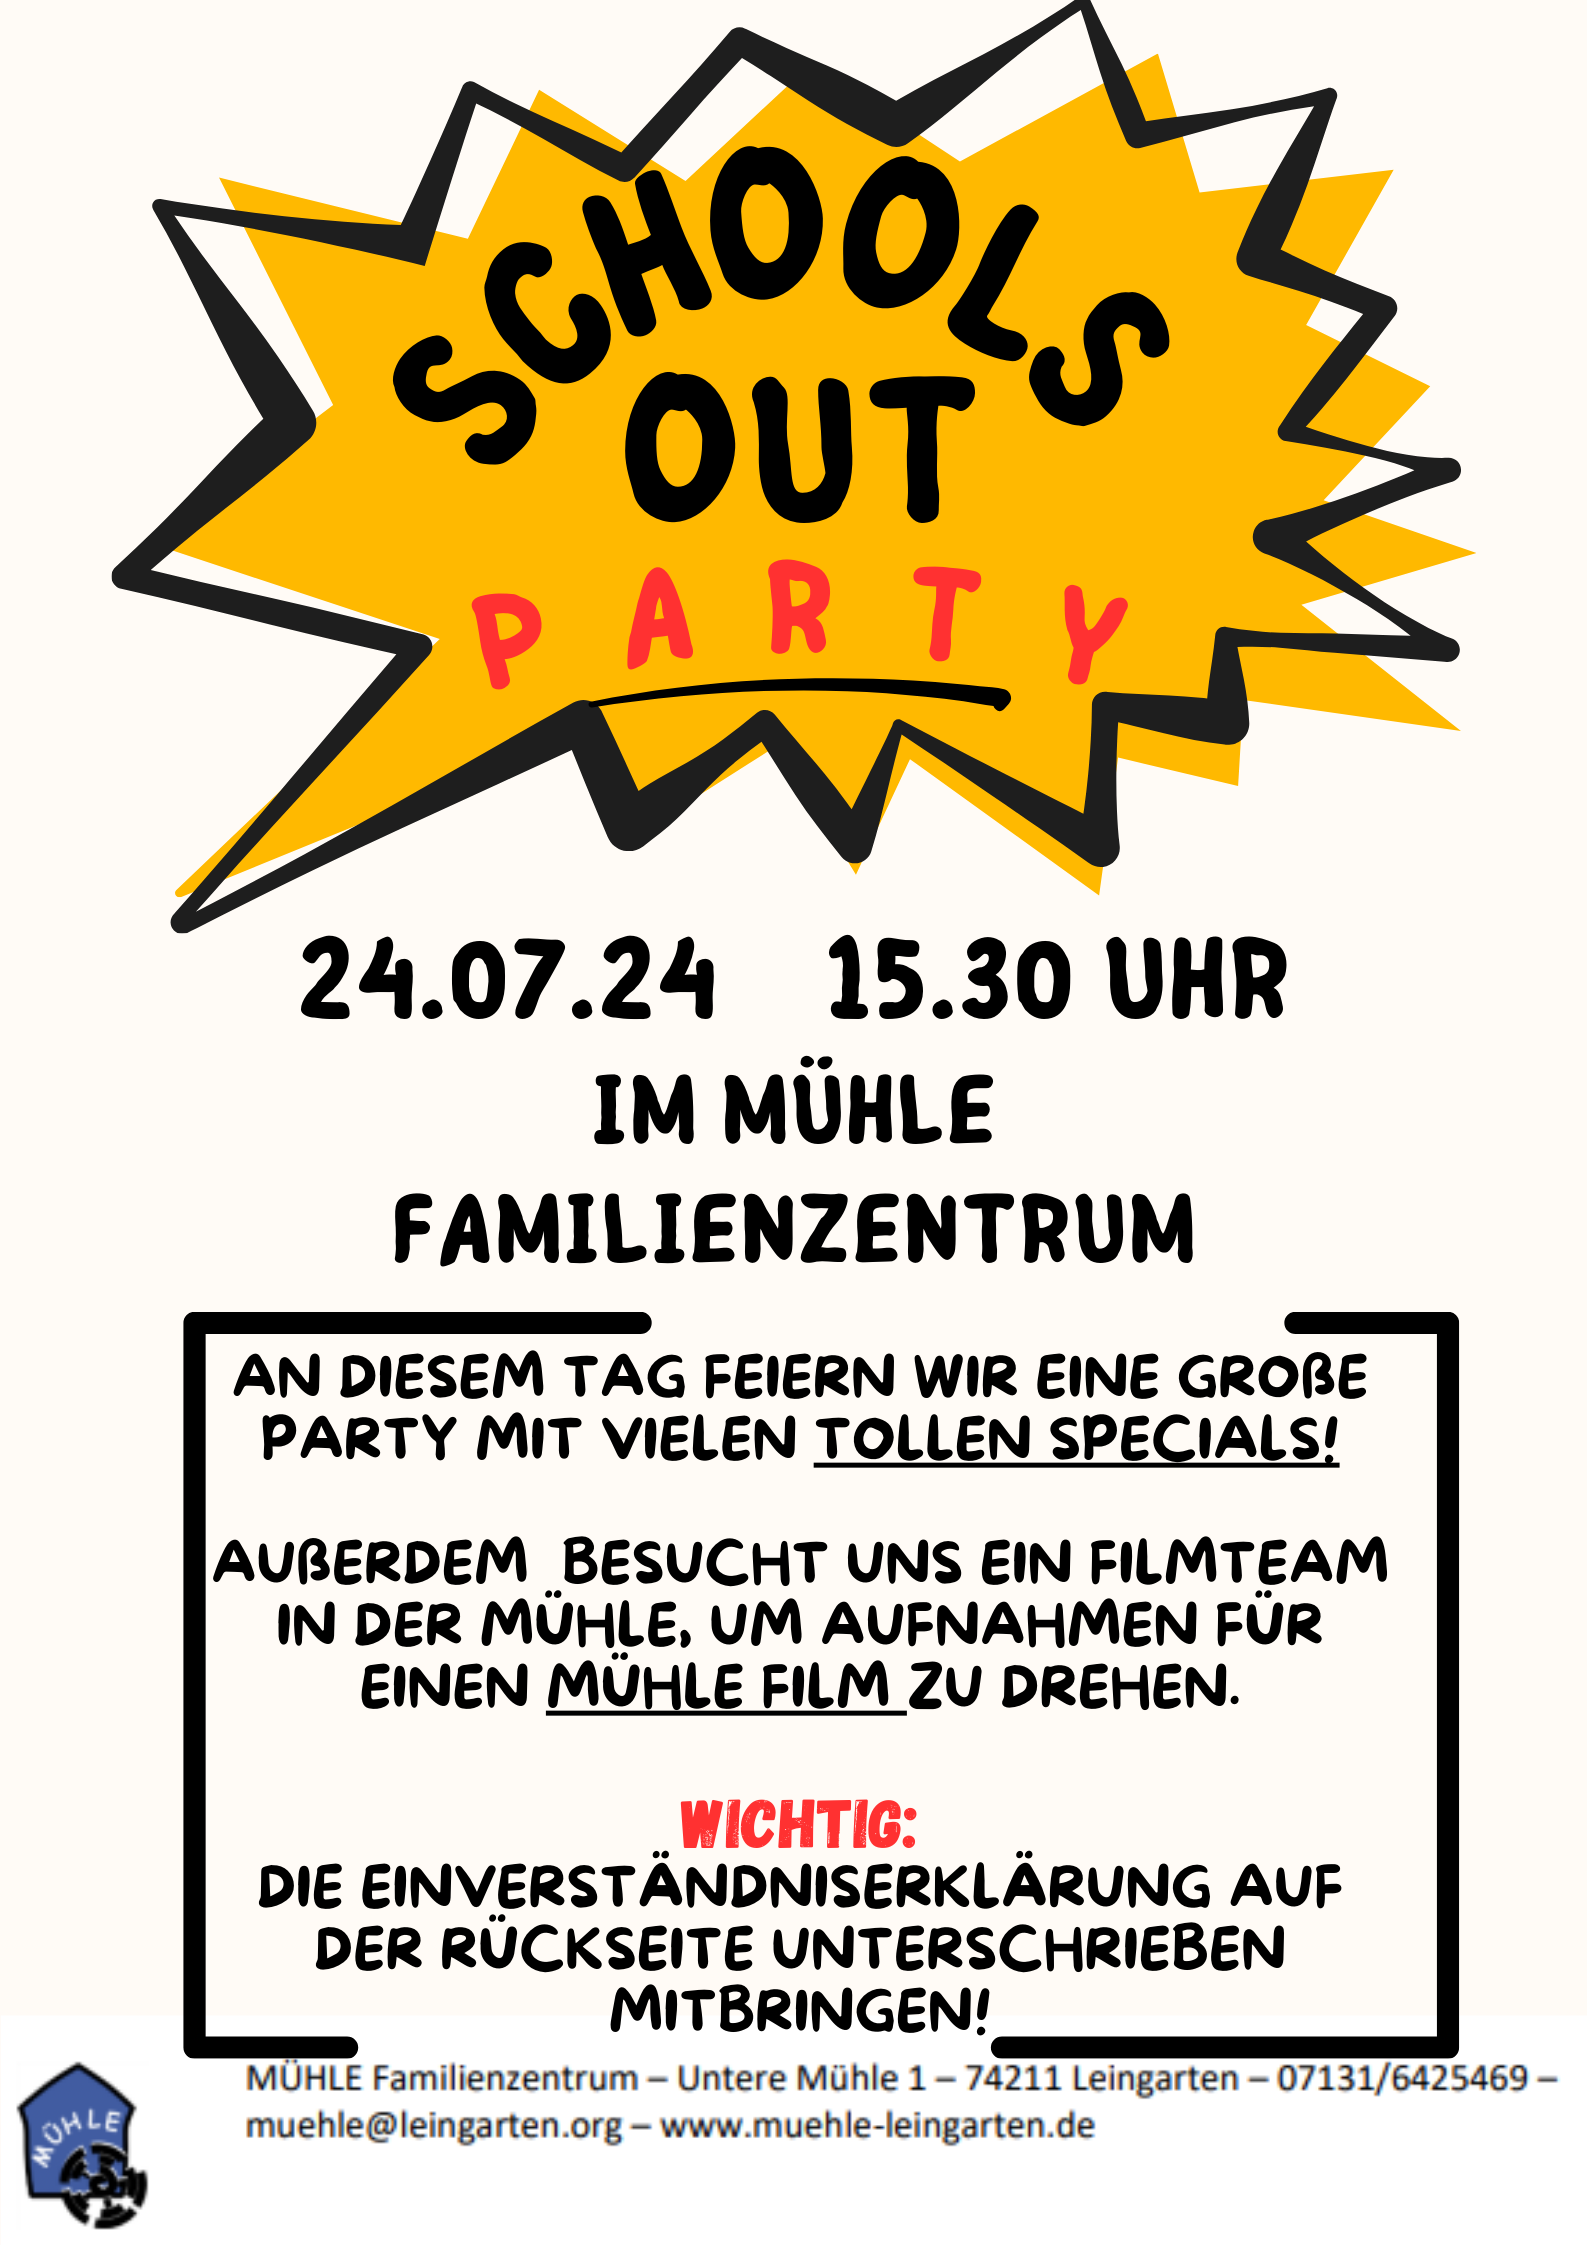 School´s out Party 